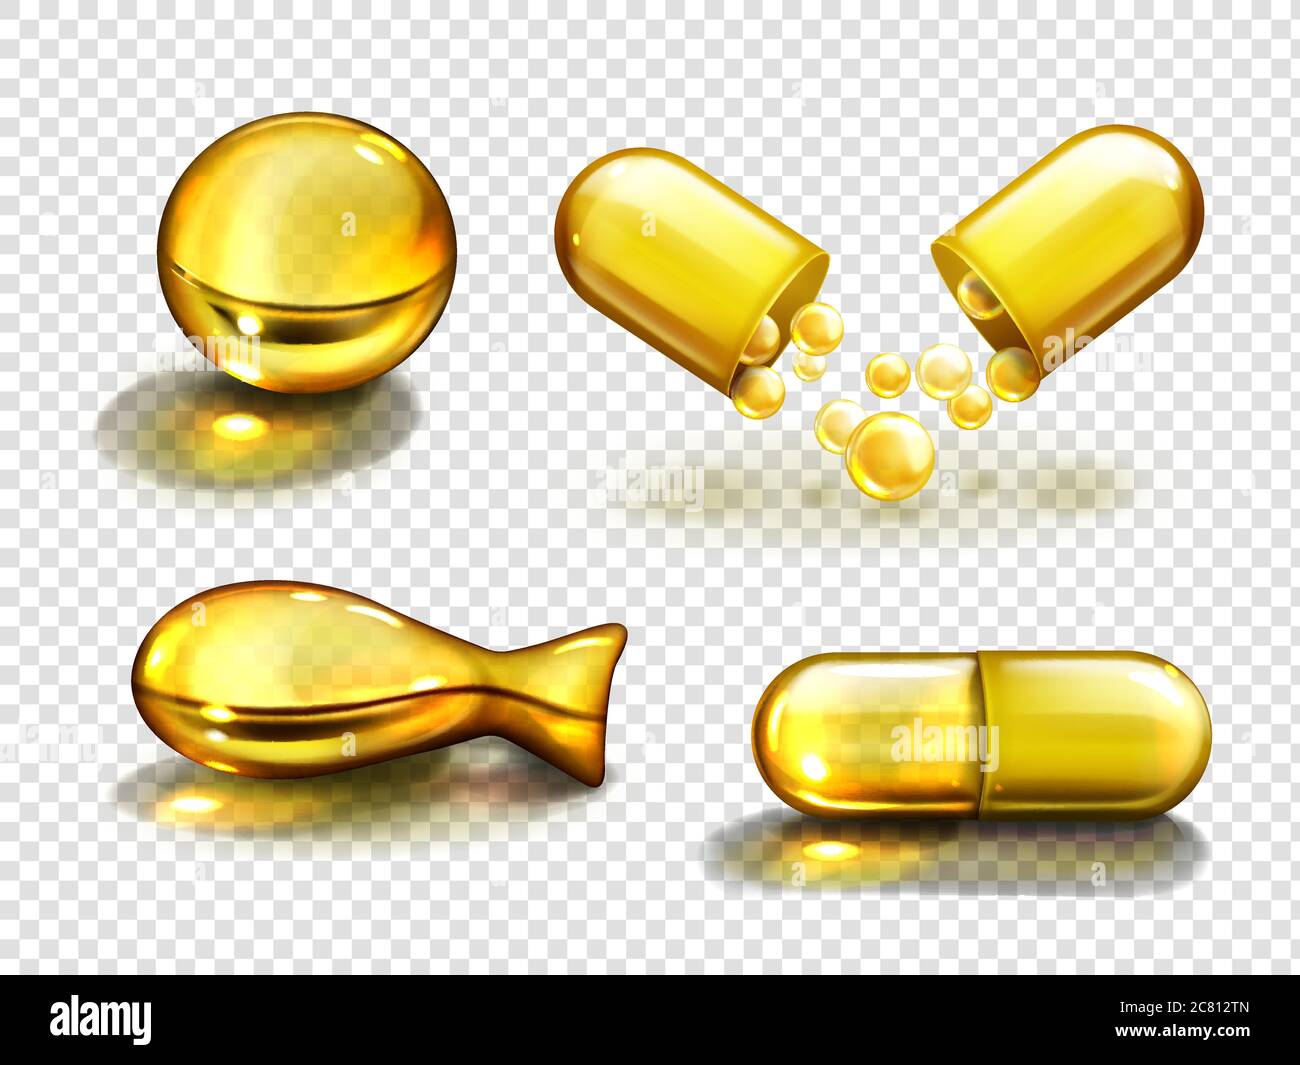 Gold oil capsules, bio supplements, fish, round and oval shape pills. Cosmetics, omega 3 golden bubbles, antibiotic gel, isolated serum droplets or collagen essence, realistic 3d vector set Stock Vector Image